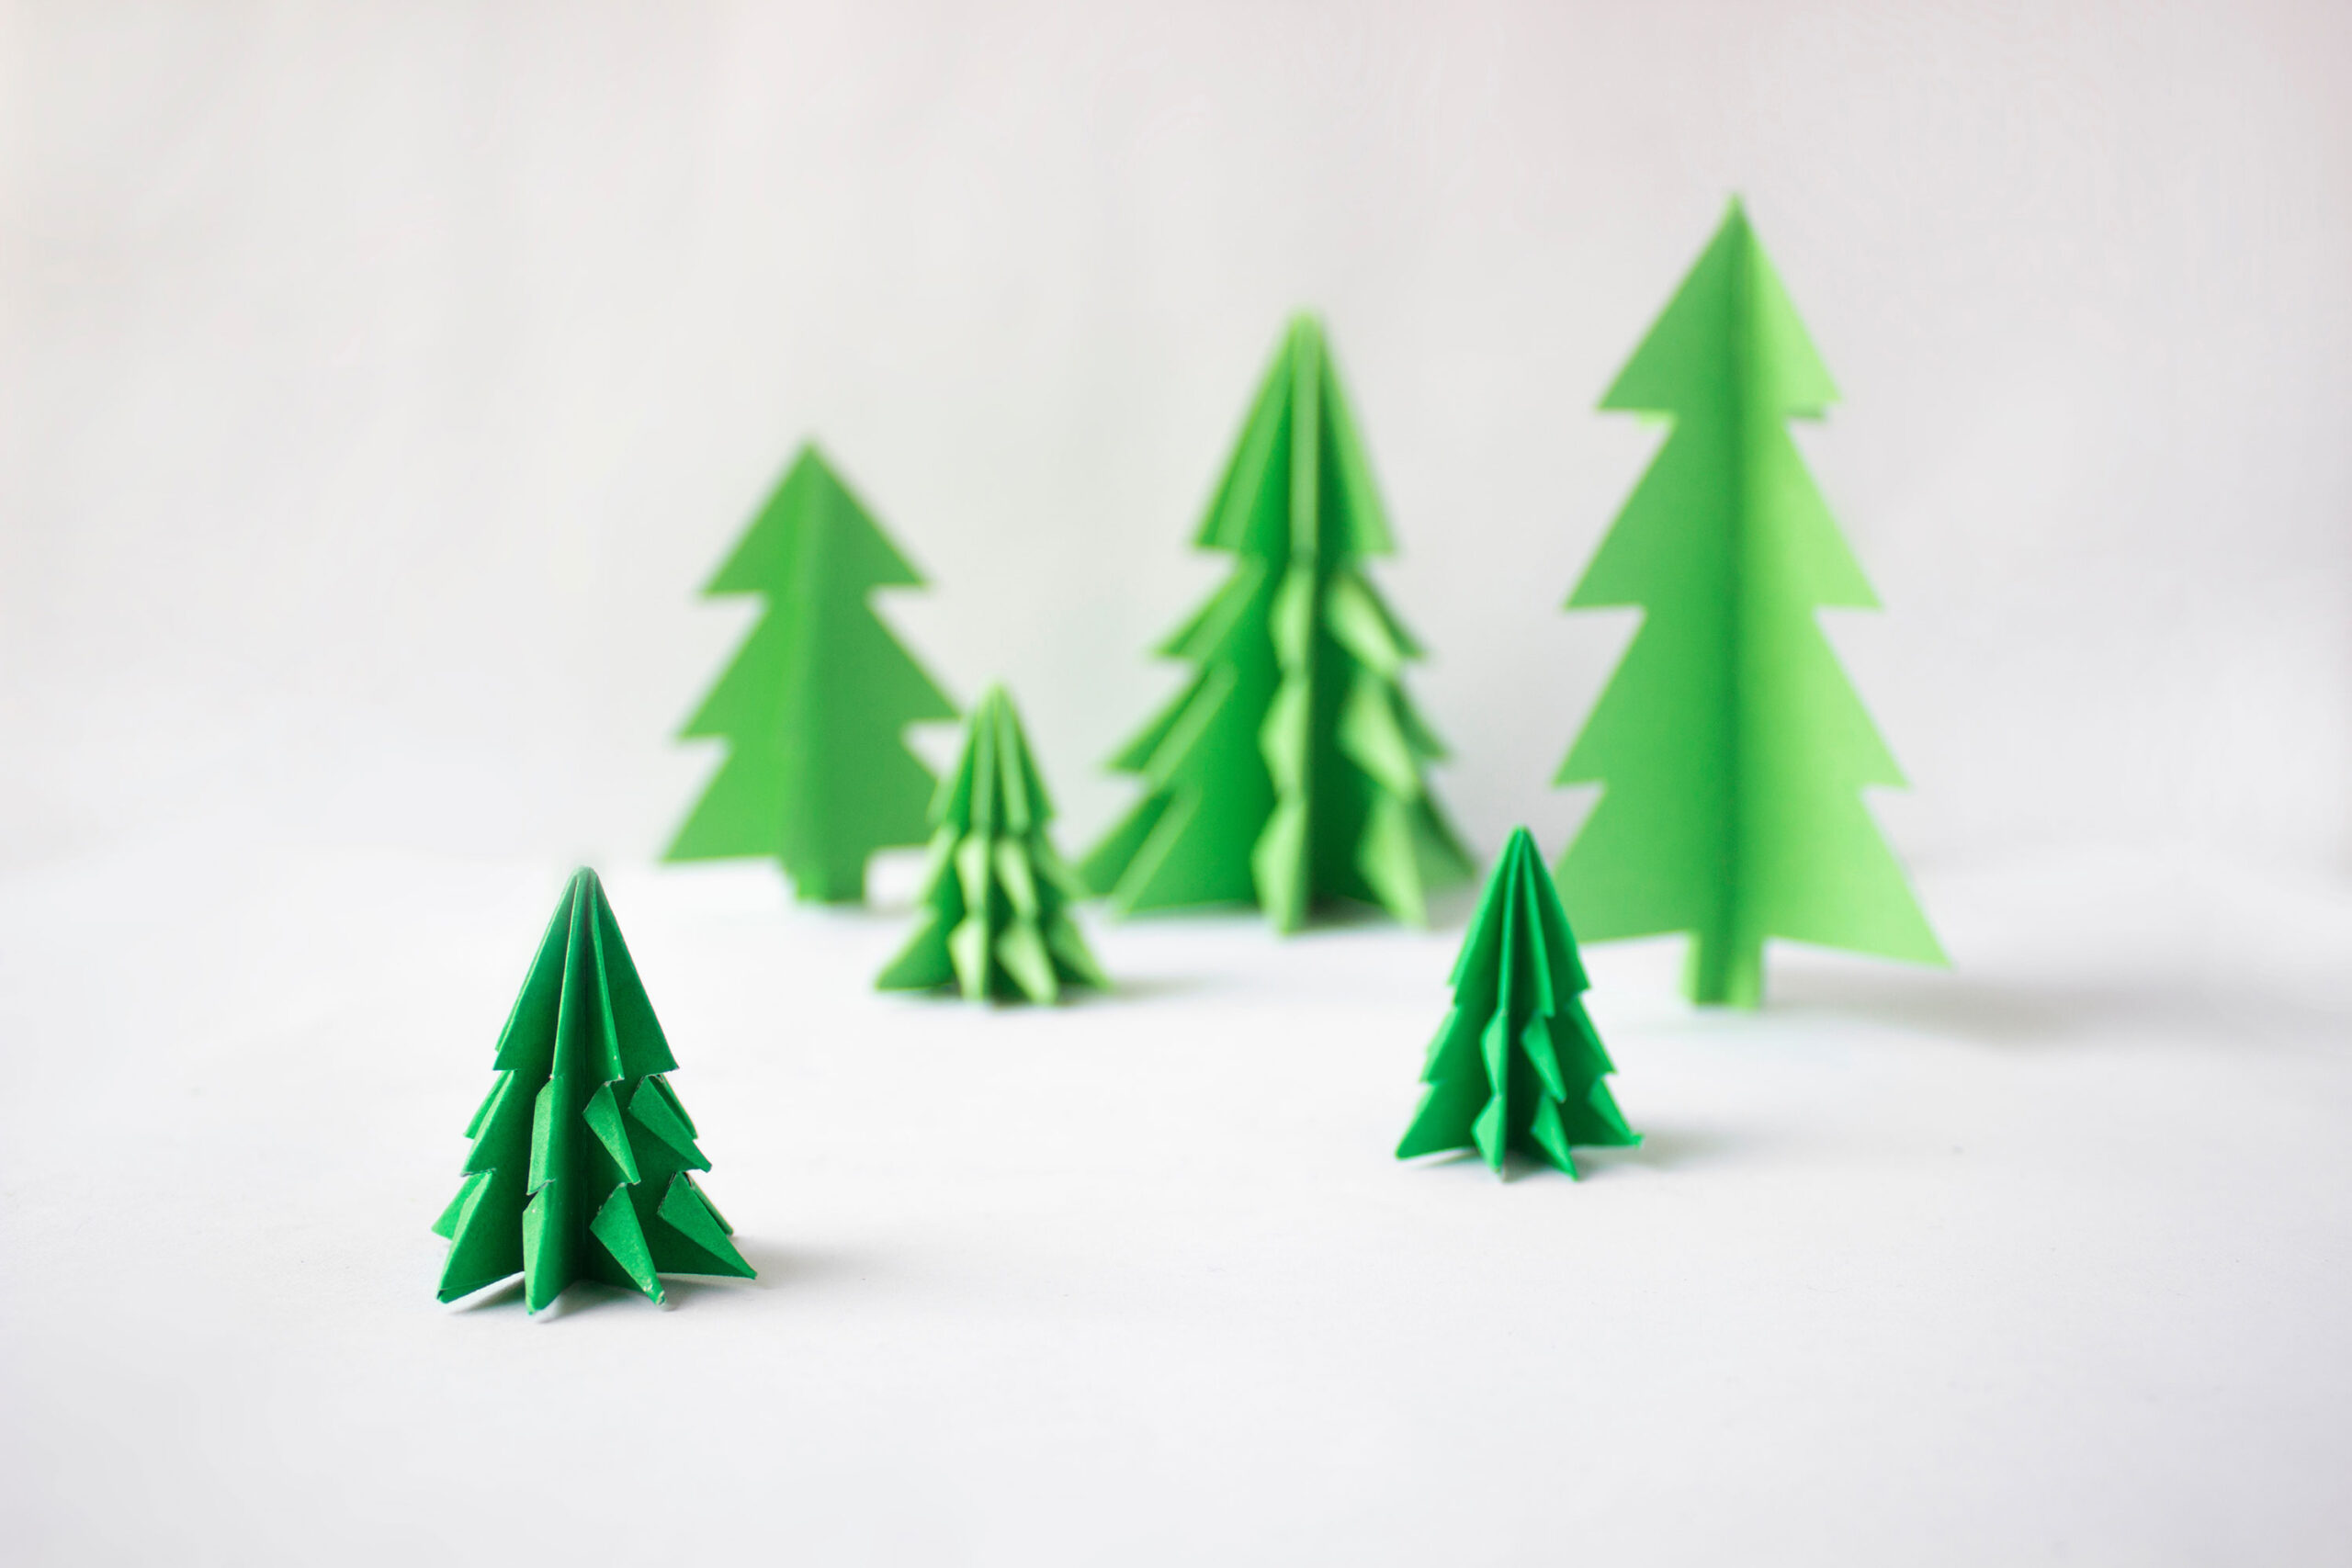 6 green paper pine trees on a light gray background